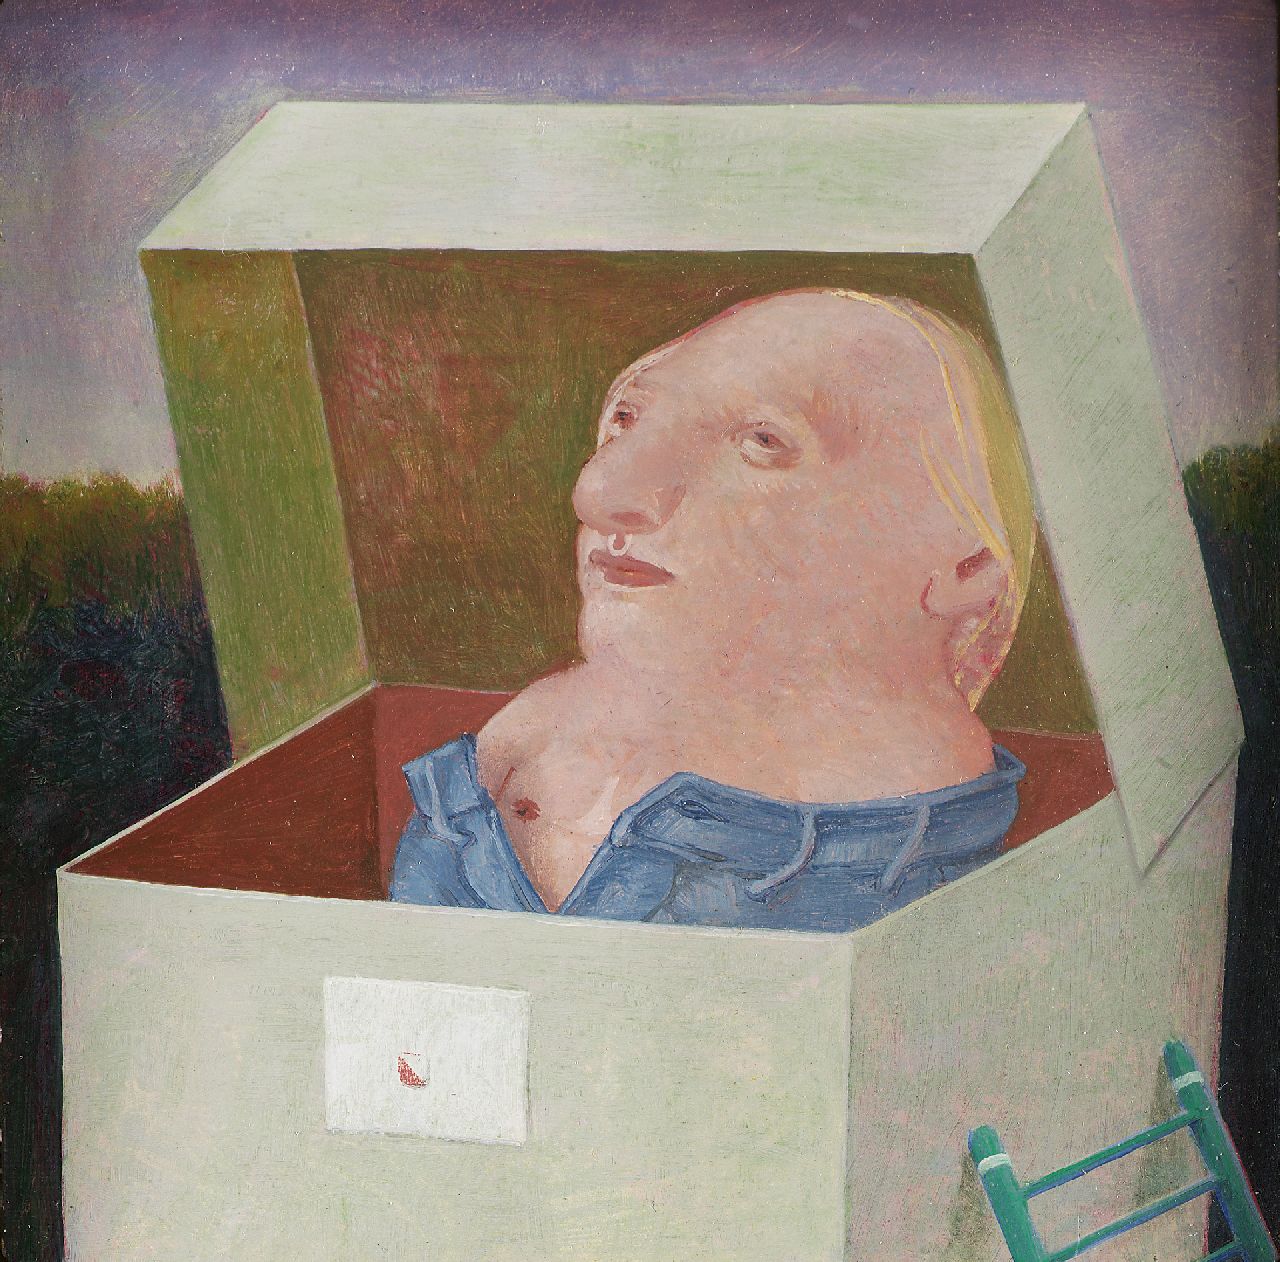 Poppel P.A.T. van | Petrus Antonius Theodorus 'Peter' van Poppel, Figure in a box, oil on paper laid down on panel 10.0 x 10.0 cm, signed on the reverse and dated 1972 on the reverse